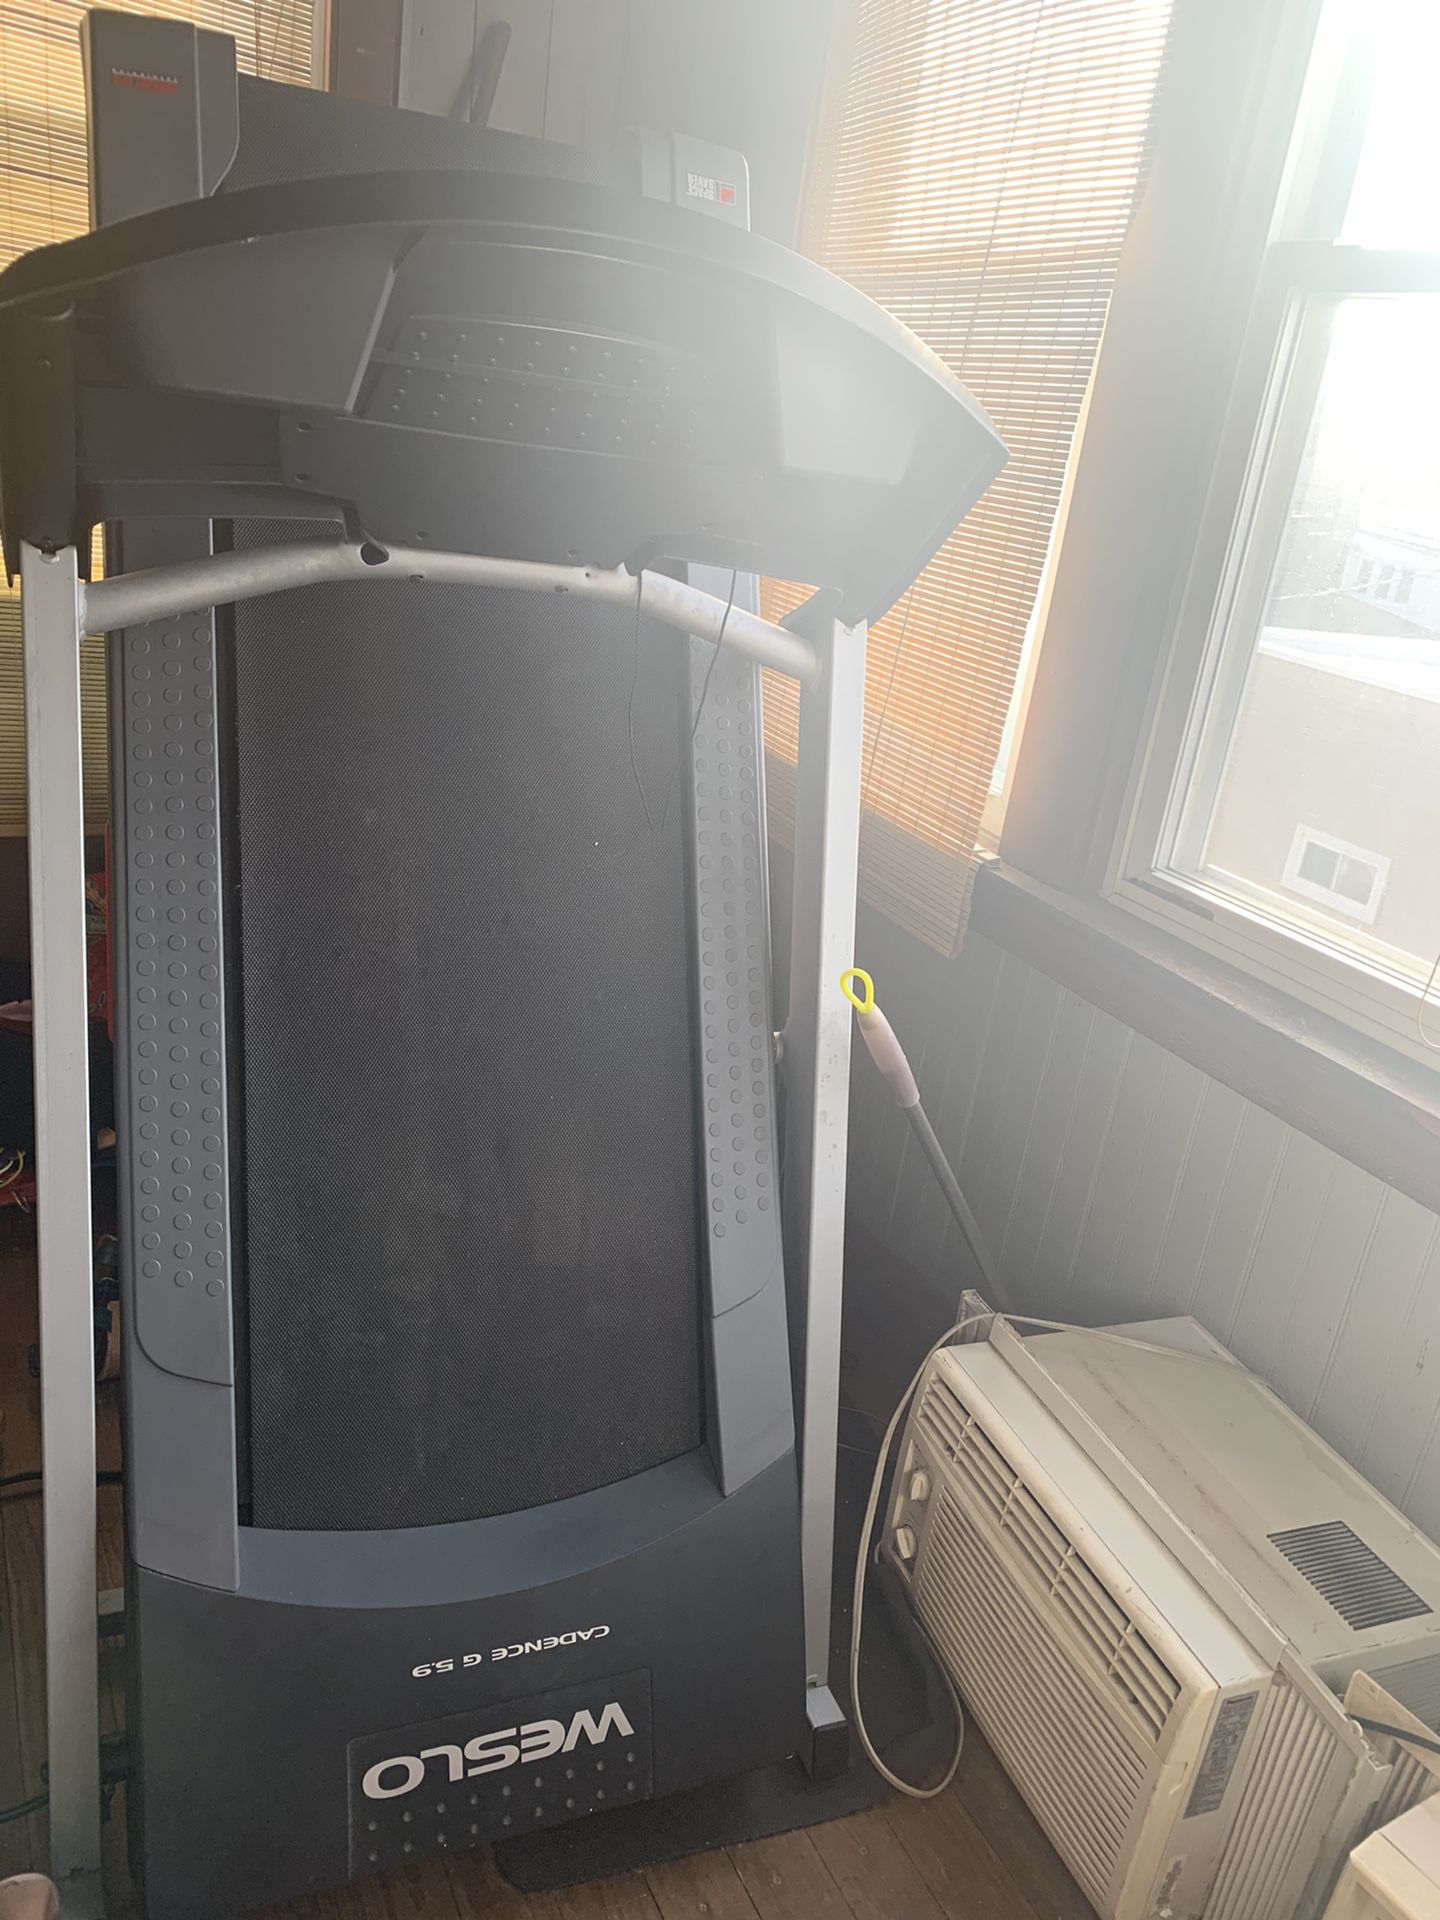 Weslo treadmill plus 2 AC for sale together